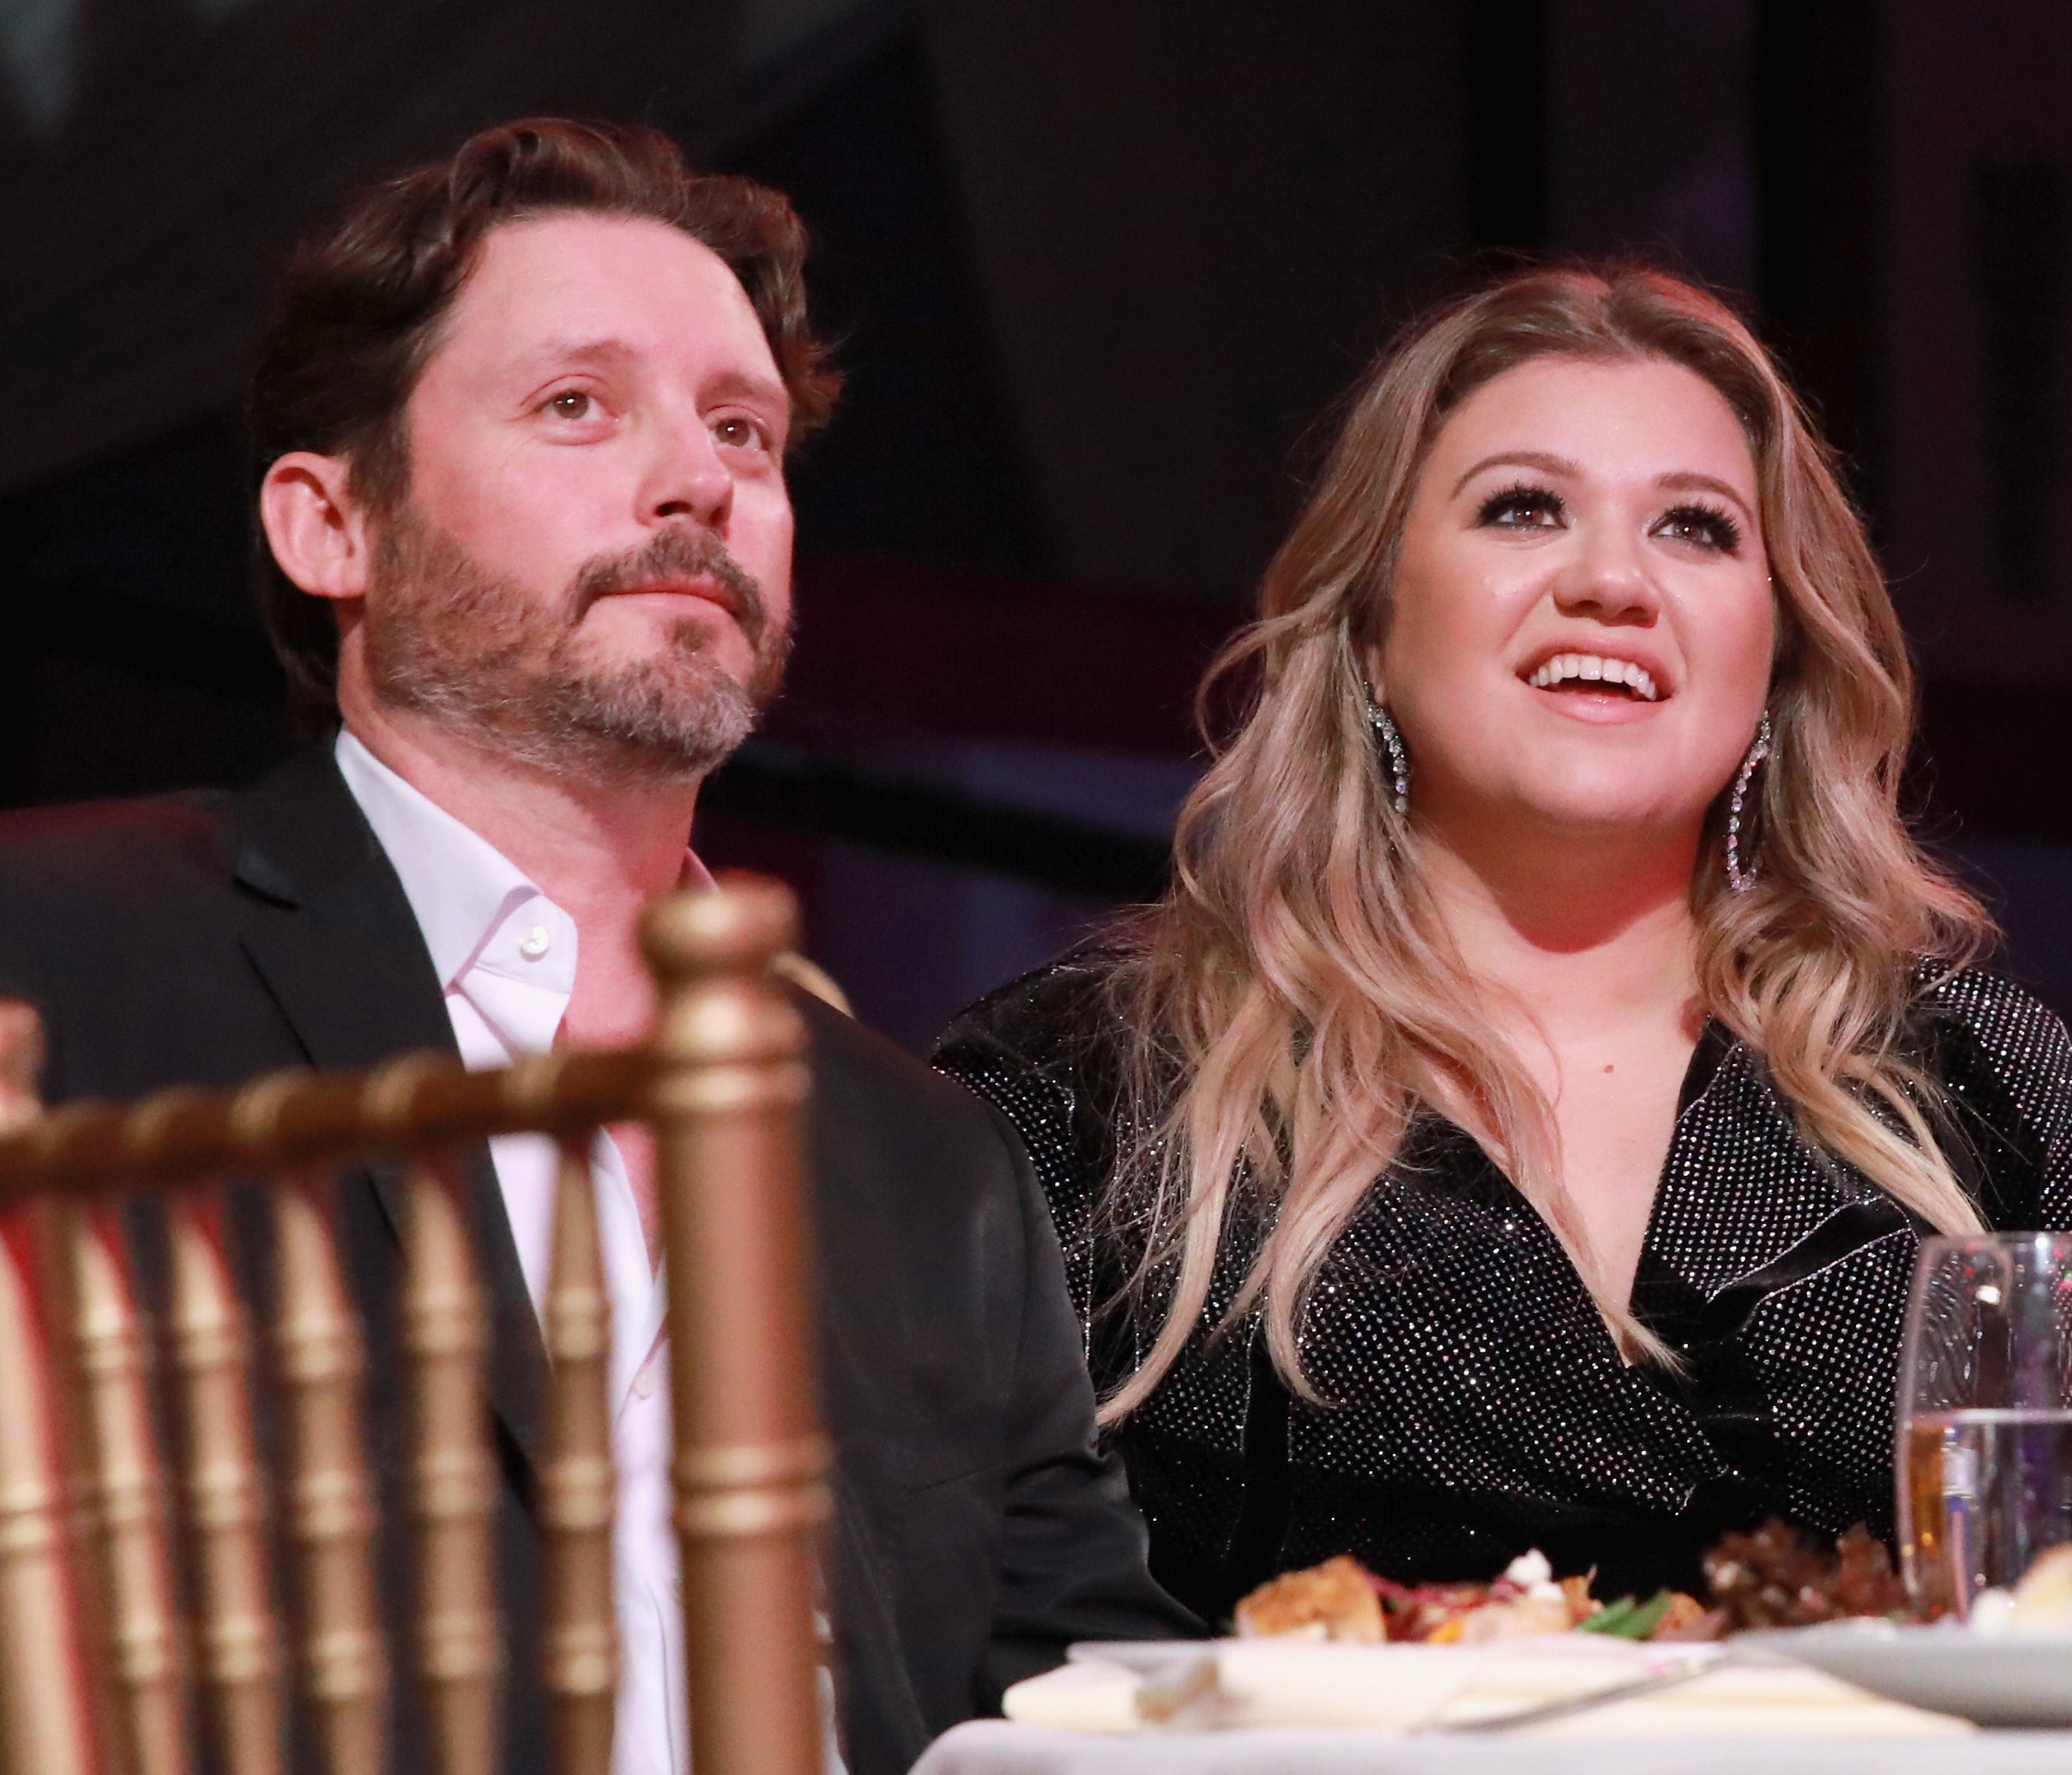 Close-up of Kelly and Brandon sitting together